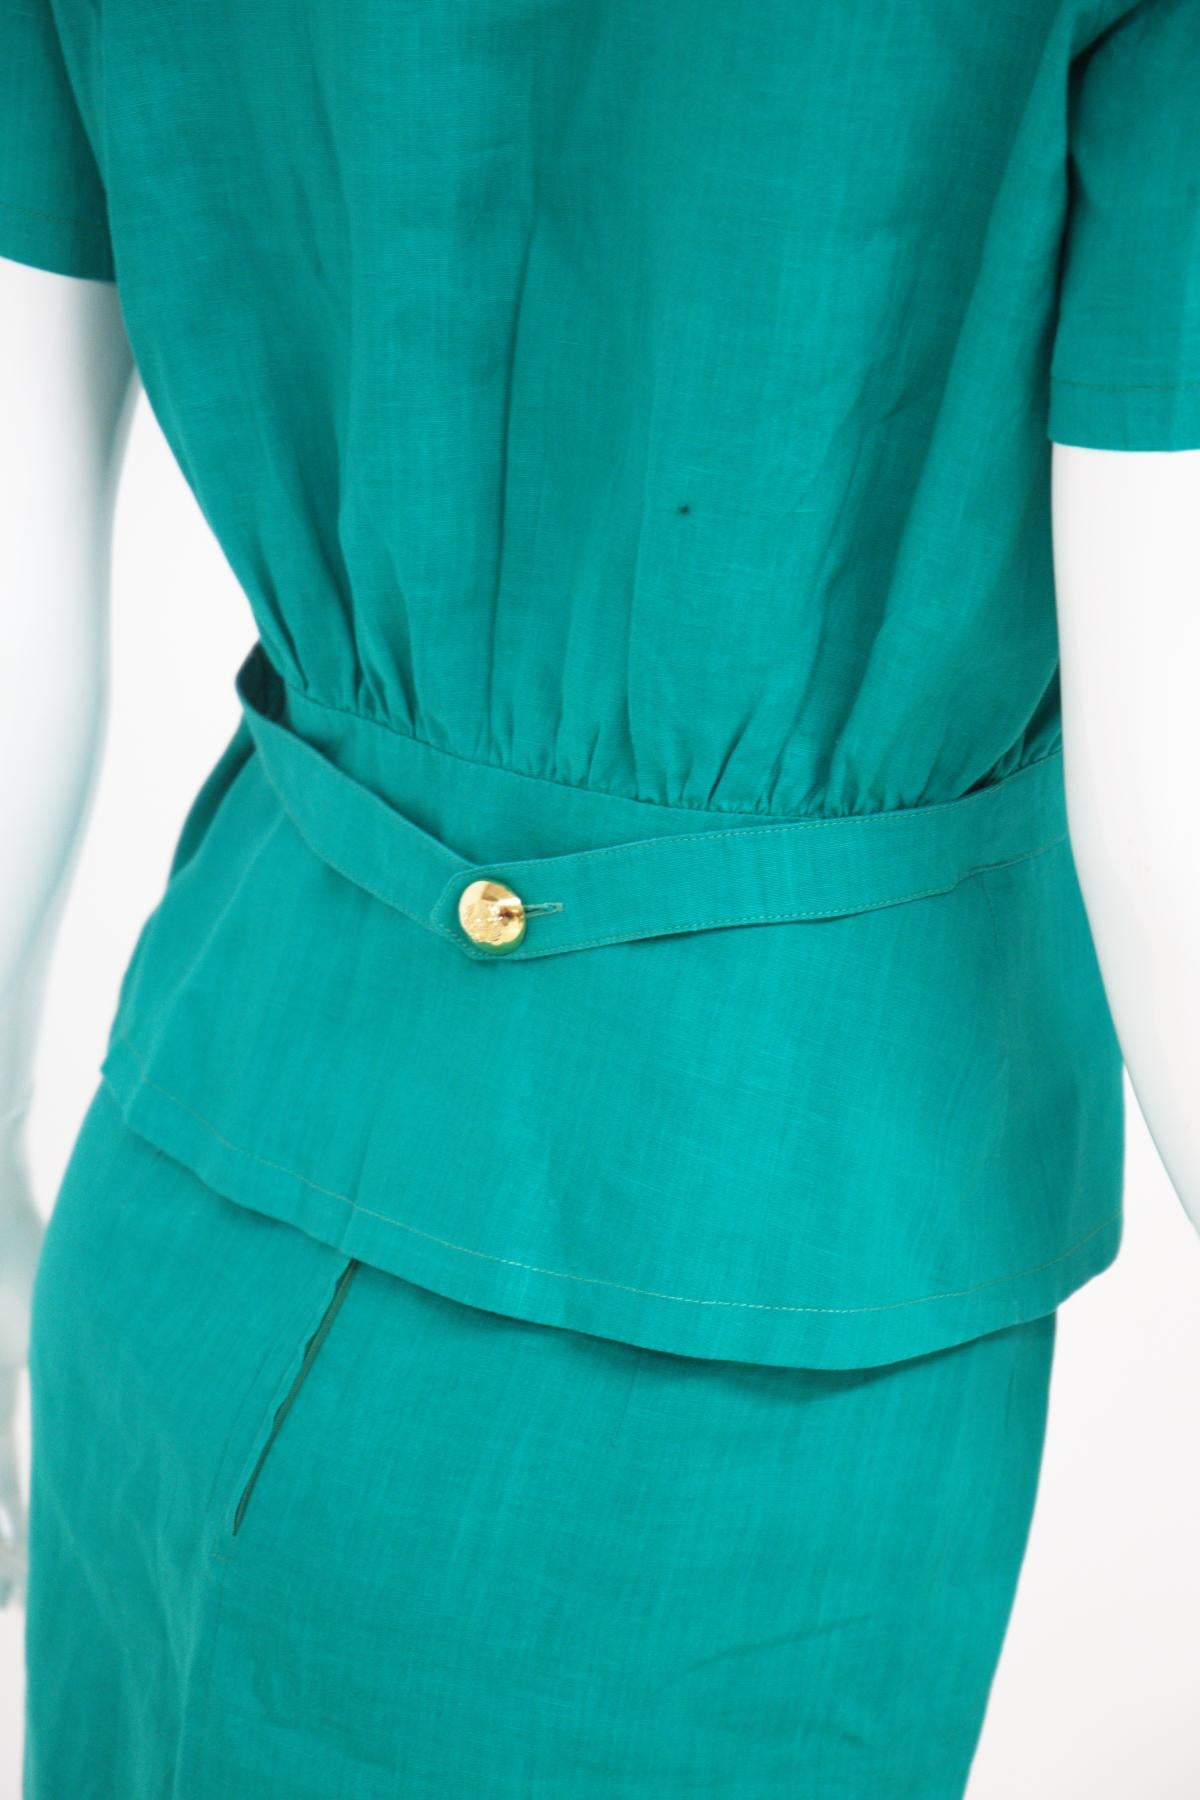 Valentino Miss V Turquoise Linen Skirt Suits 2